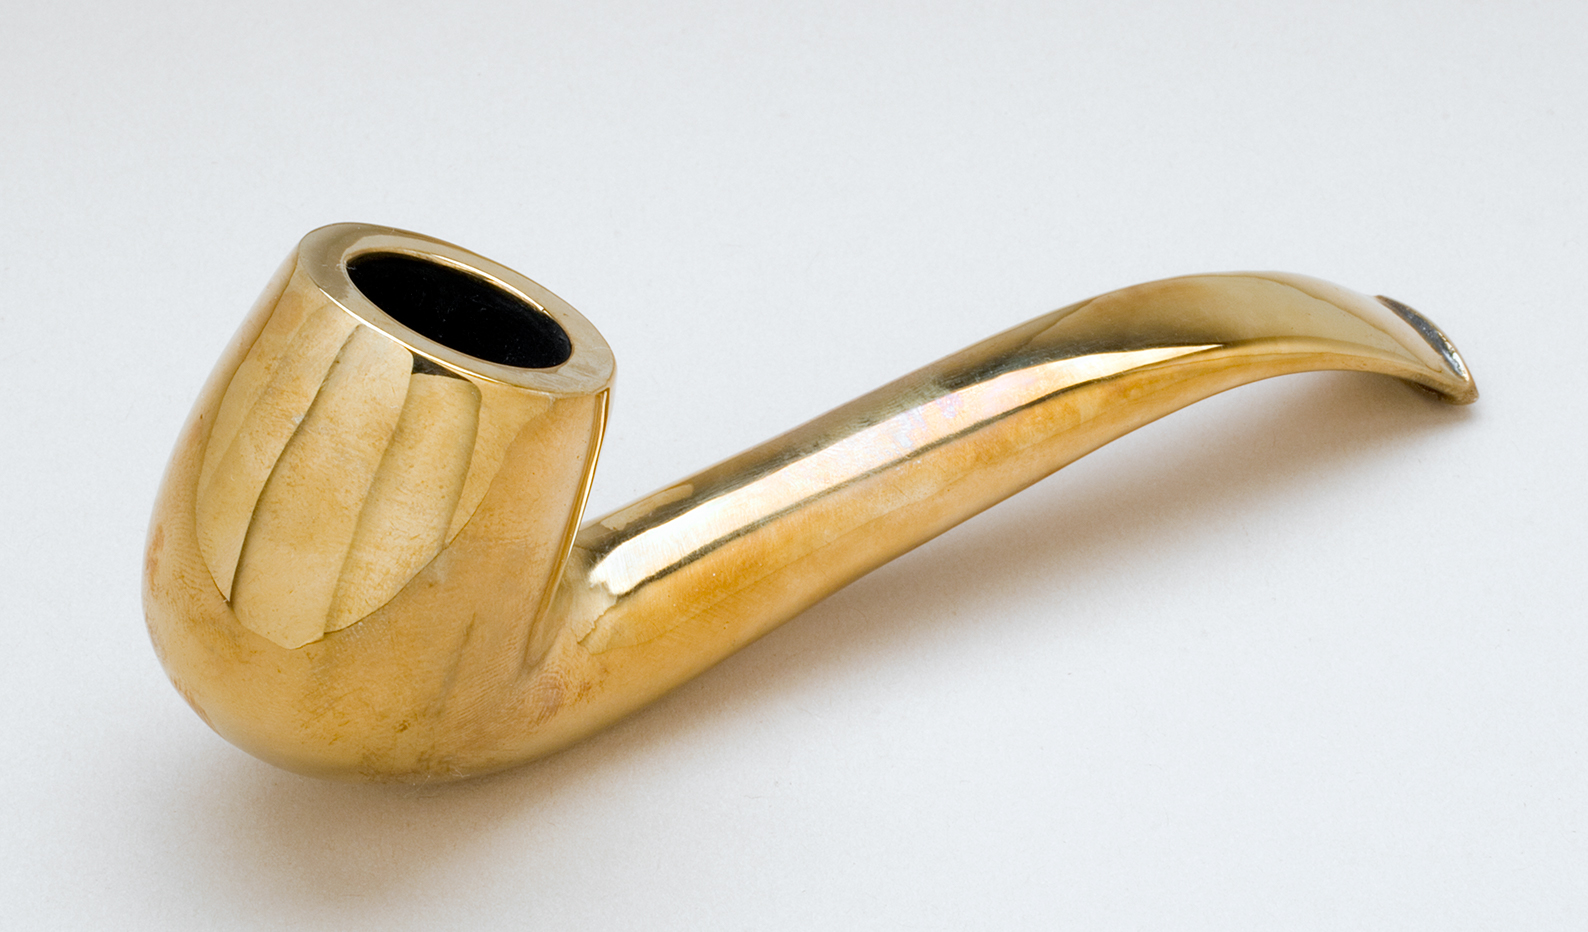 Une Pipe (A Pipe), 2001